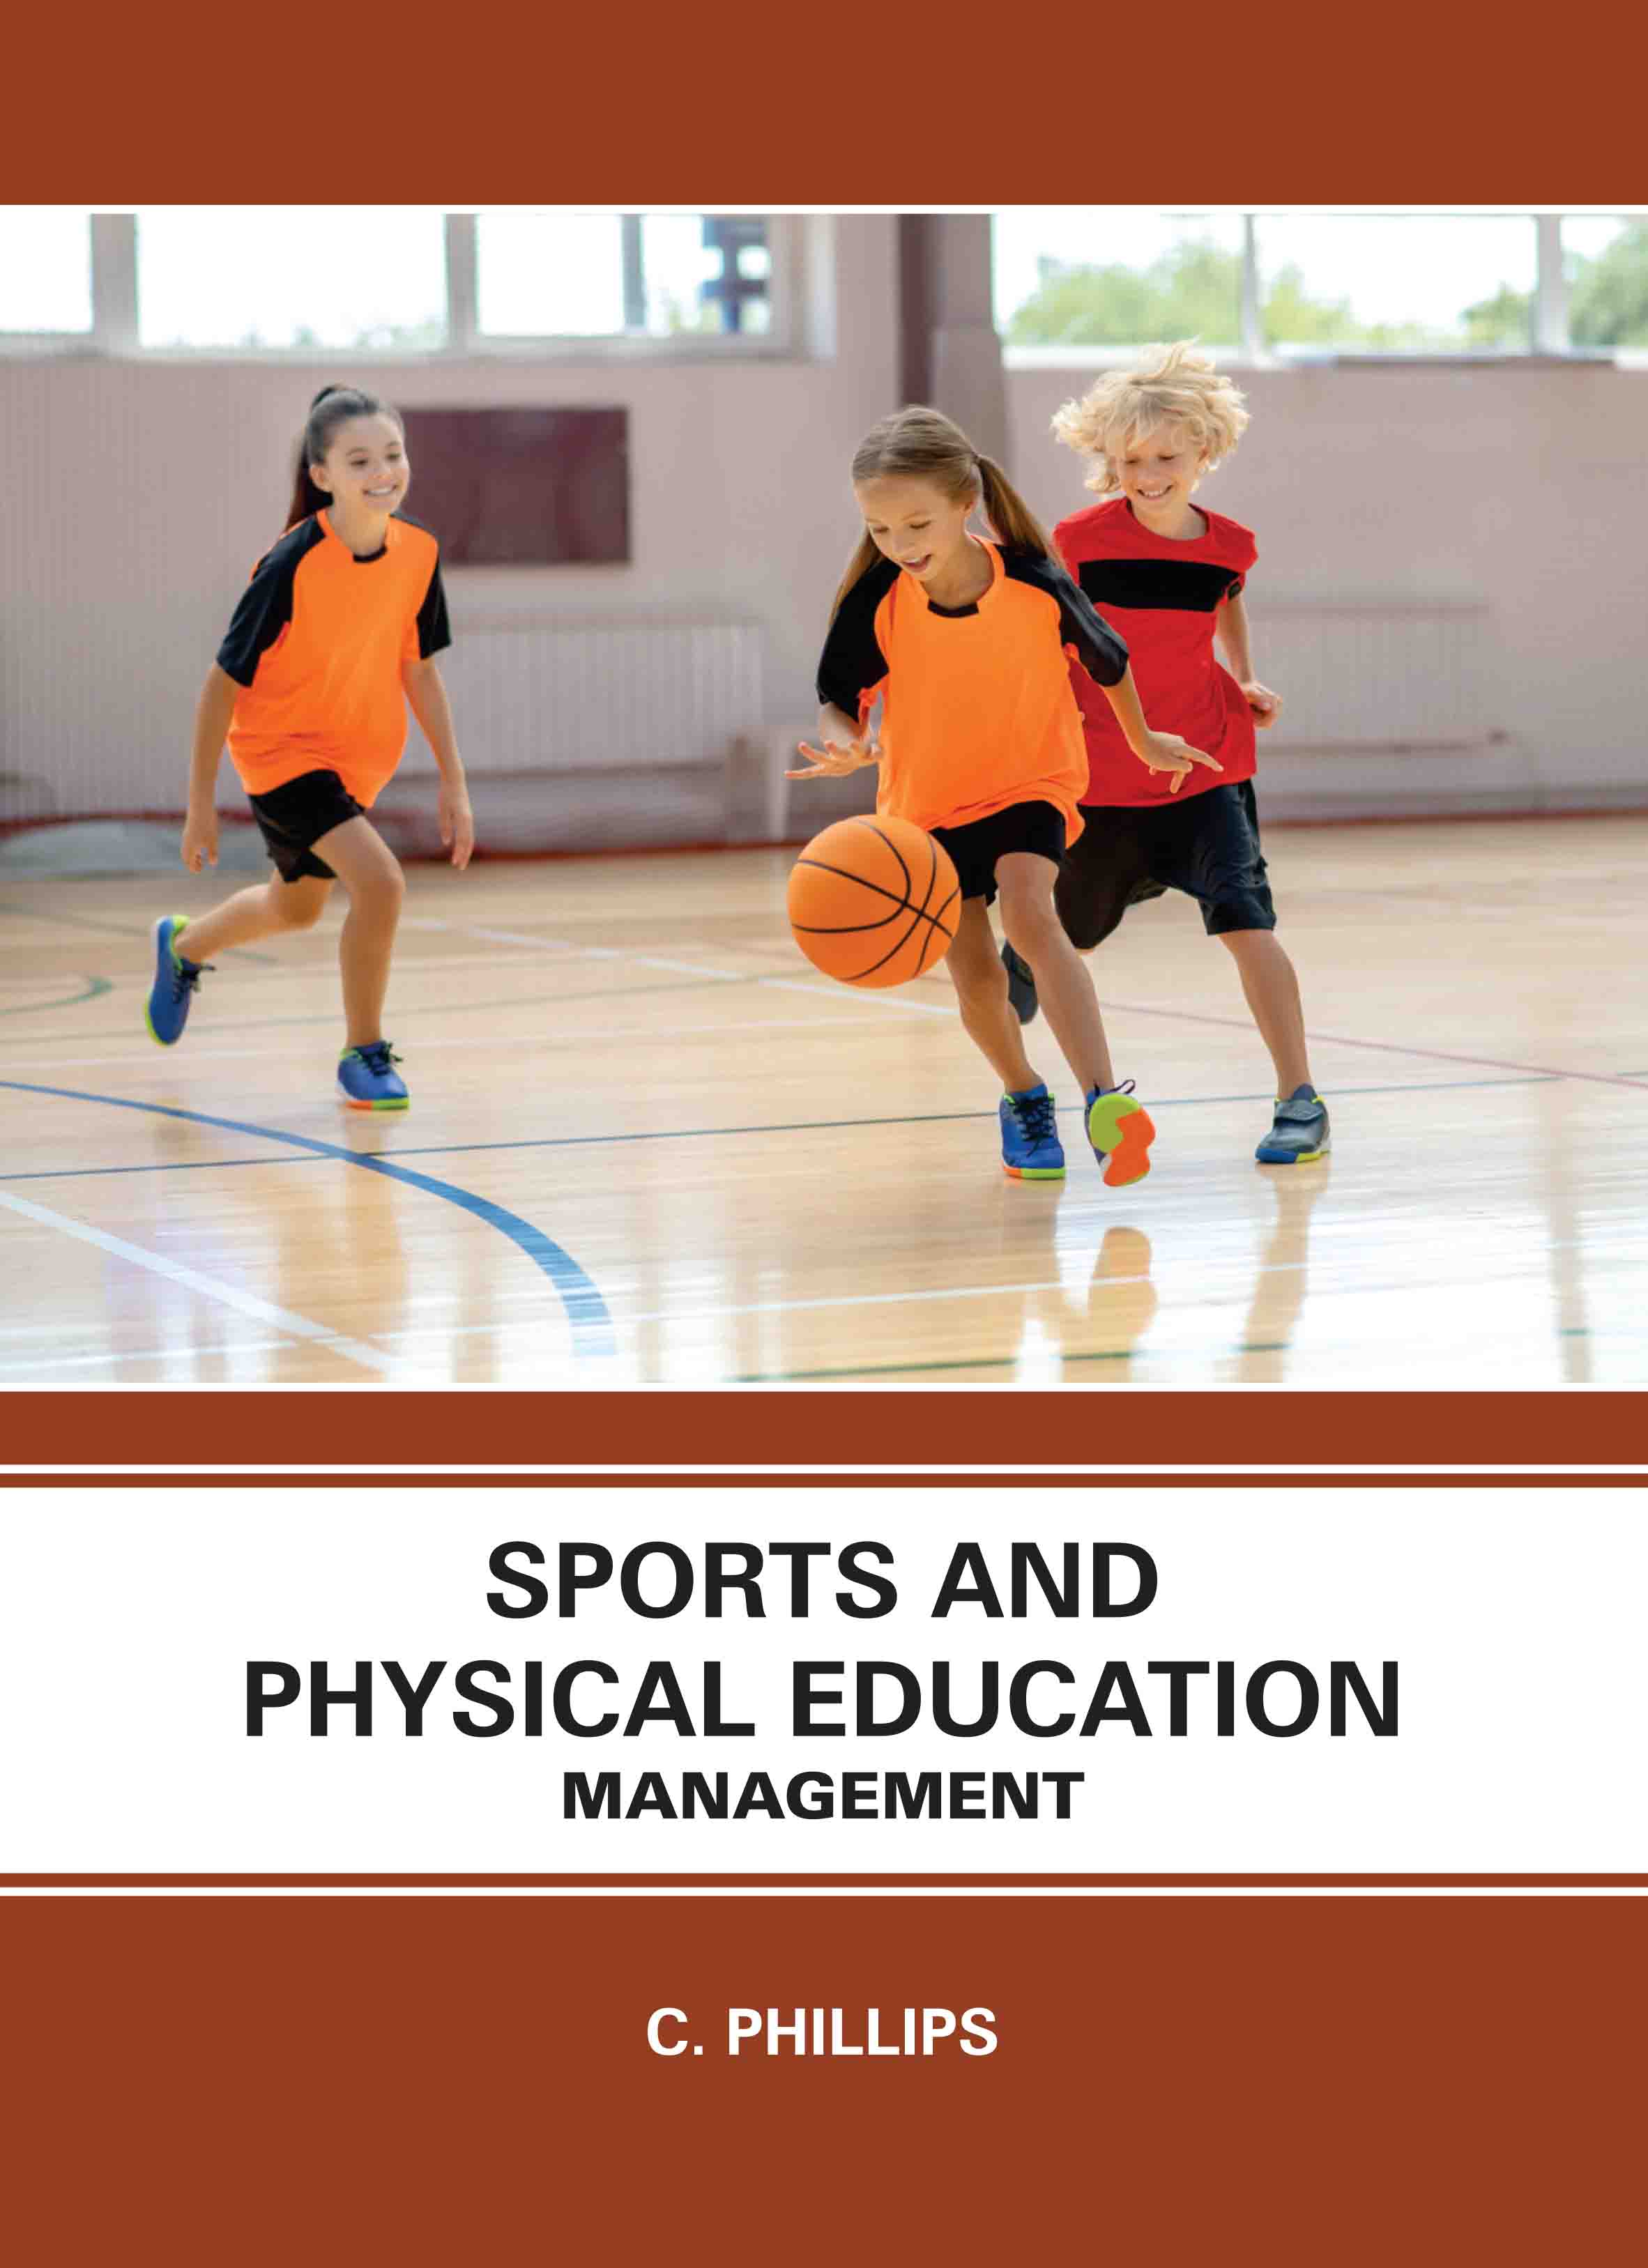 Sports and Physical Education: Management